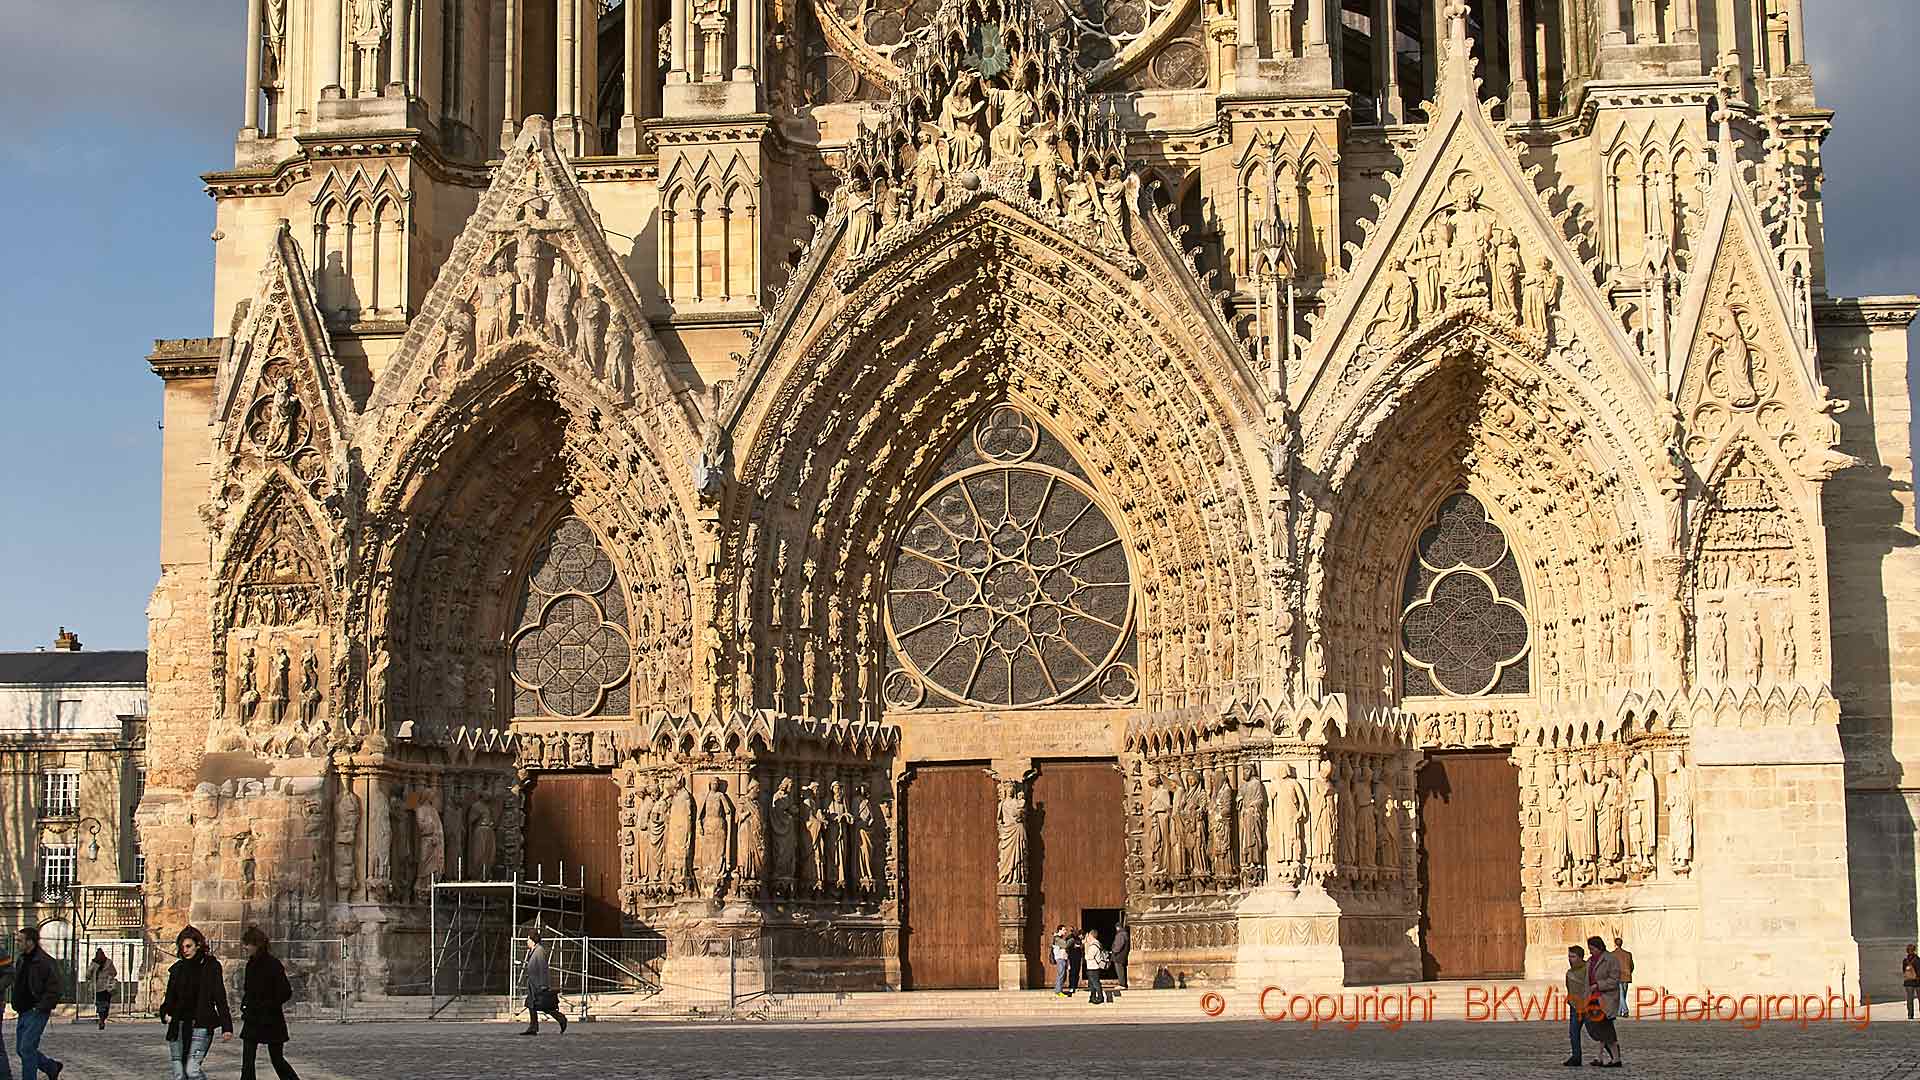 The magnificent cathedral in Reims in Champagne